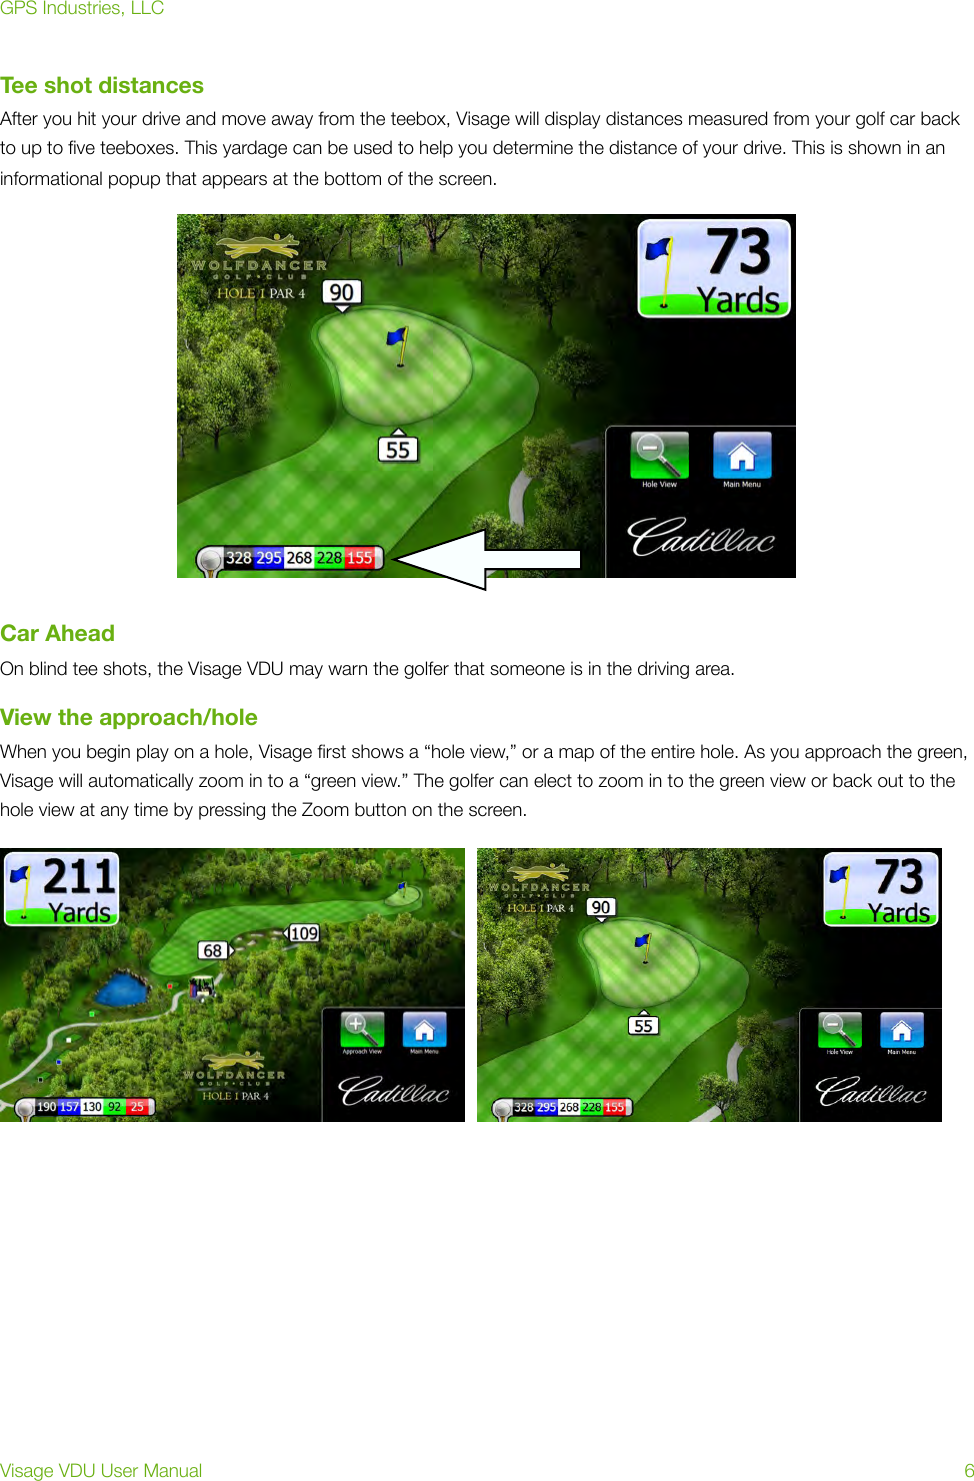 Tee shot distancesAfter you hit your drive and move away from the teebox, Visage will display distances measured from your golf car back to up to ﬁve teeboxes. This yardage can be used to help you determine the distance of your drive. This is shown in an informational popup that appears at the bottom of the screen.Car AheadOn blind tee shots, the Visage VDU may warn the golfer that someone is in the driving area.View the approach/holeWhen you begin play on a hole, Visage ﬁrst shows a “hole view,” or a map of the entire hole. As you approach the green, Visage will automatically zoom in to a “green view.” The golfer can elect to zoom in to the green view or back out to the hole view at any time by pressing the Zoom button on the screen.  GPS Industries, LLCVisage VDU User Manual!6